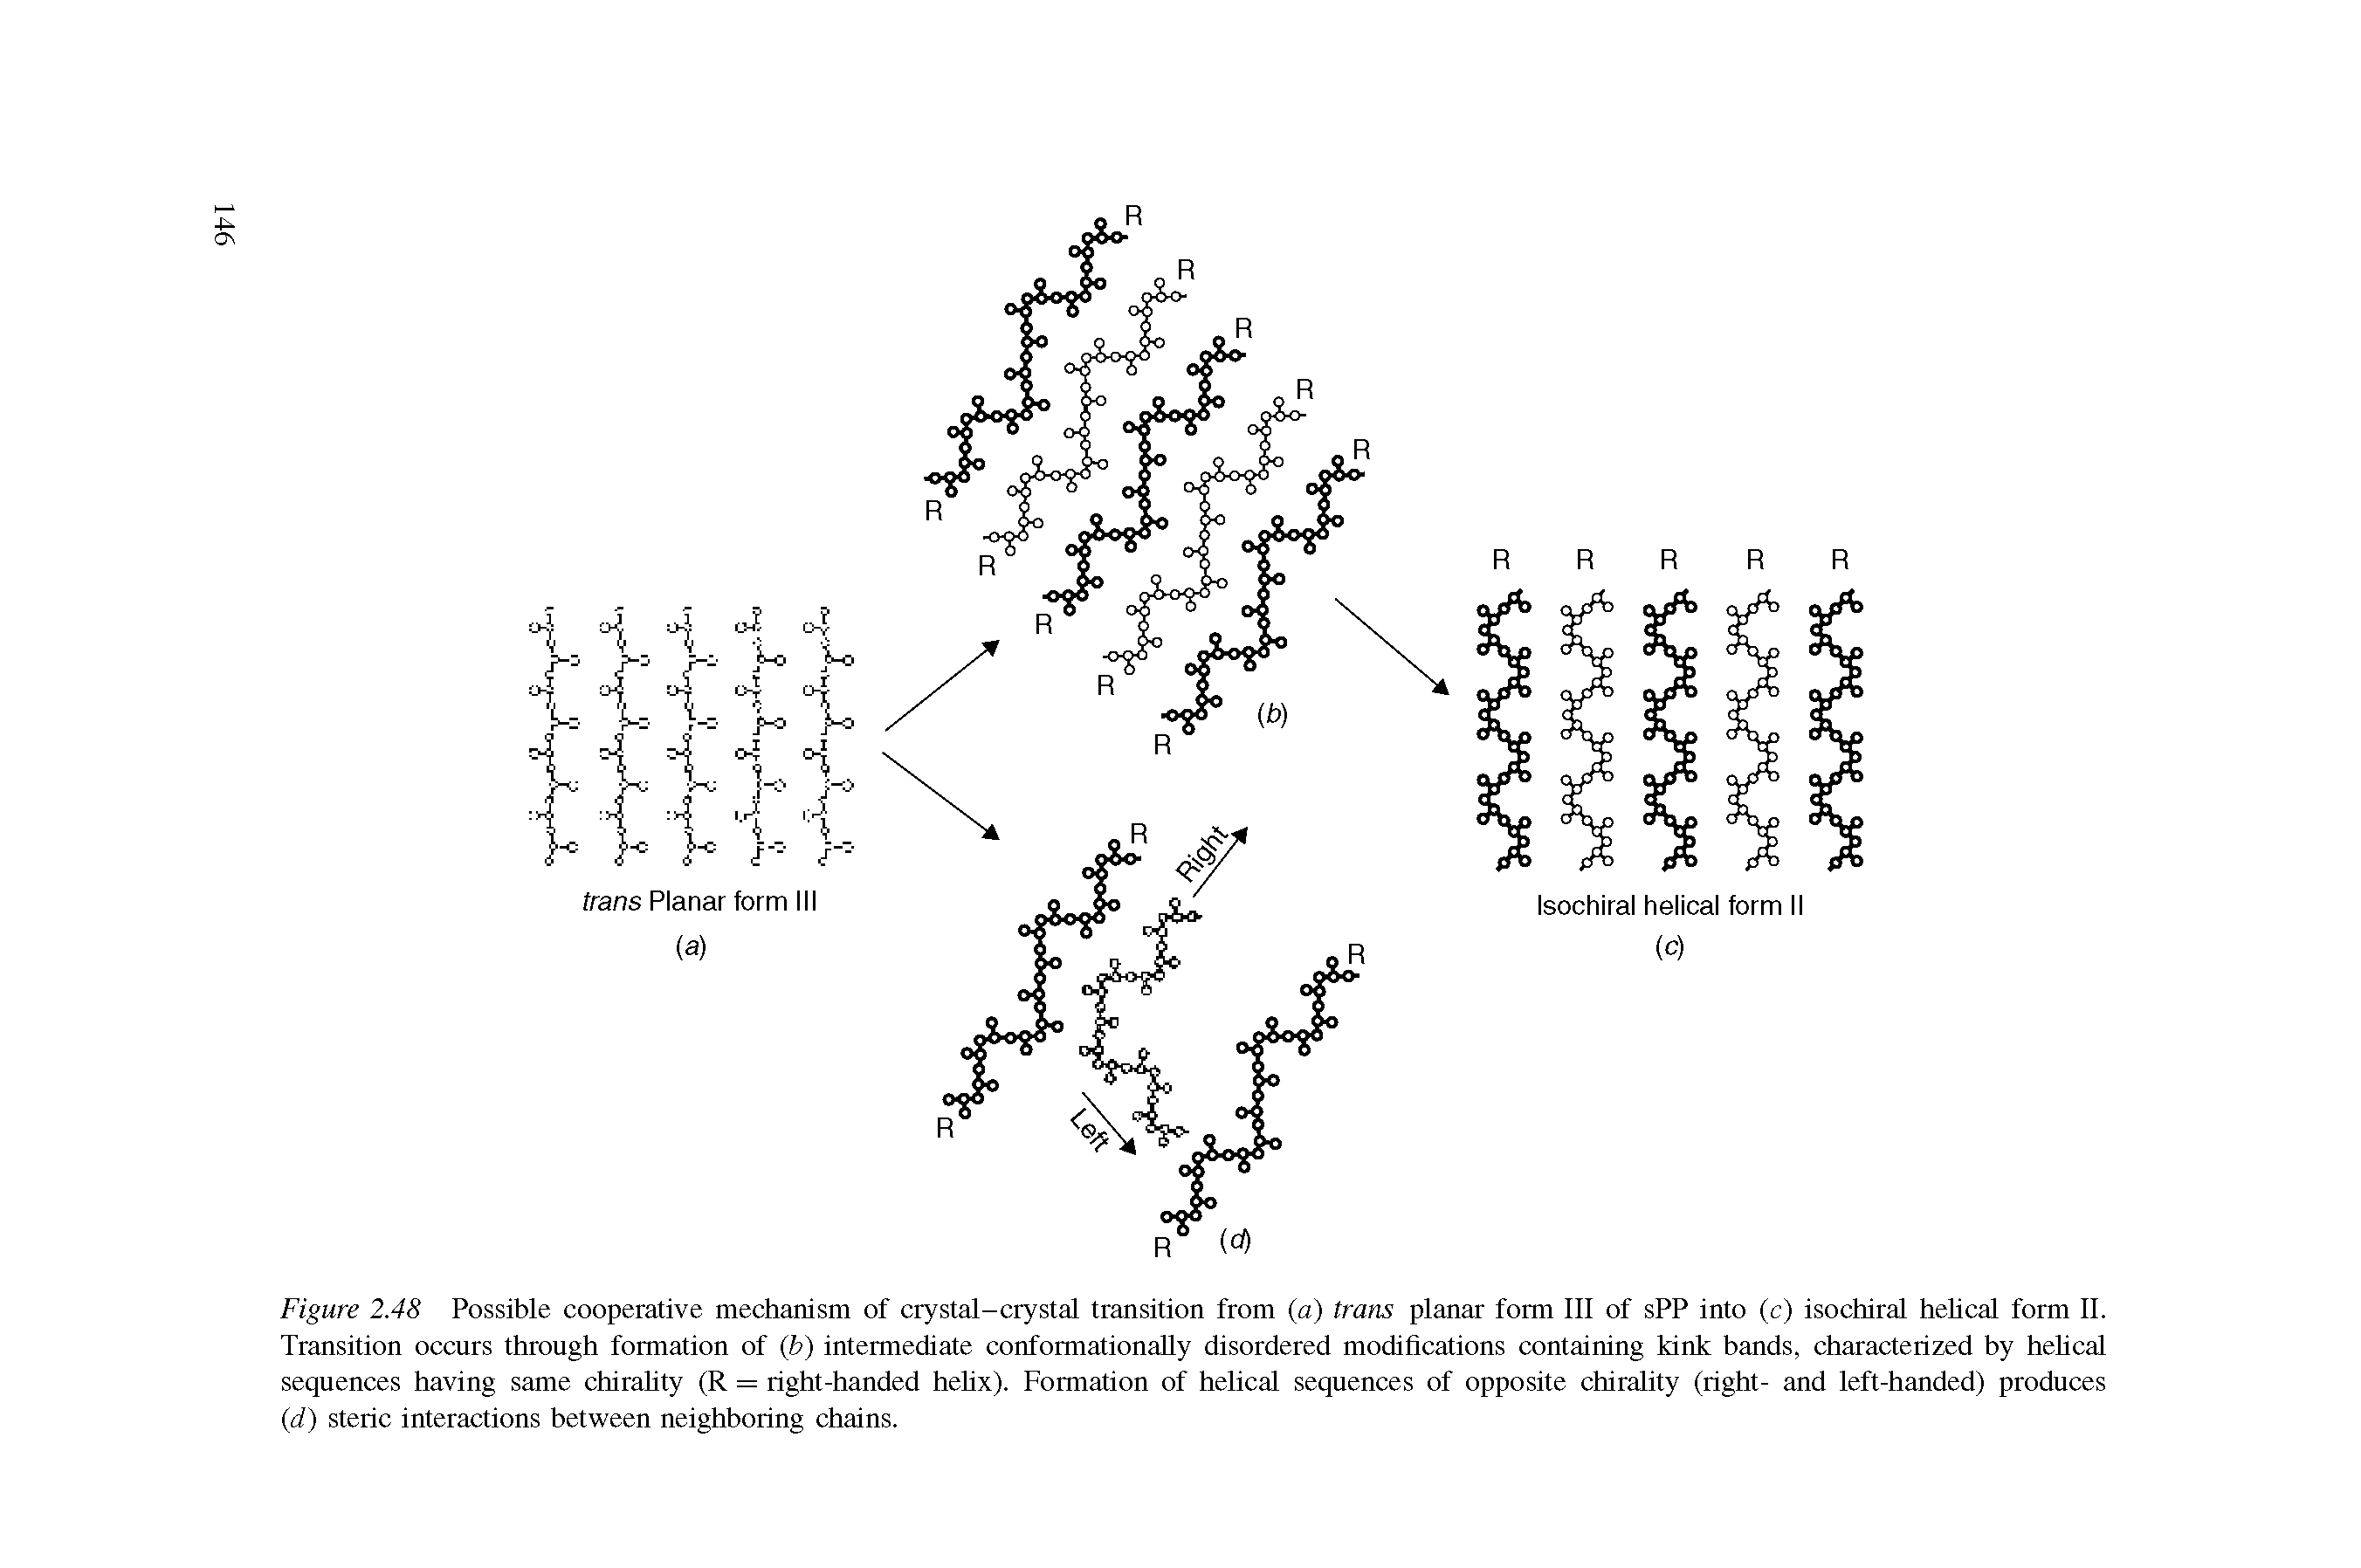 Figure 2.48 Possible cooperative mechanism of crystal-crystal transition from (a) trans planar form III of sPP into (c) isochiral helical form II. Transition occurs through formation of (b) intermediate conformationally disordered modifications containing kink bands, characterized by helical sequences having same chirality (R = right-handed helix). Formation of helical sequences of opposite chirality (right- and left-handed) produces (if) steric interactions between neighboring chains.